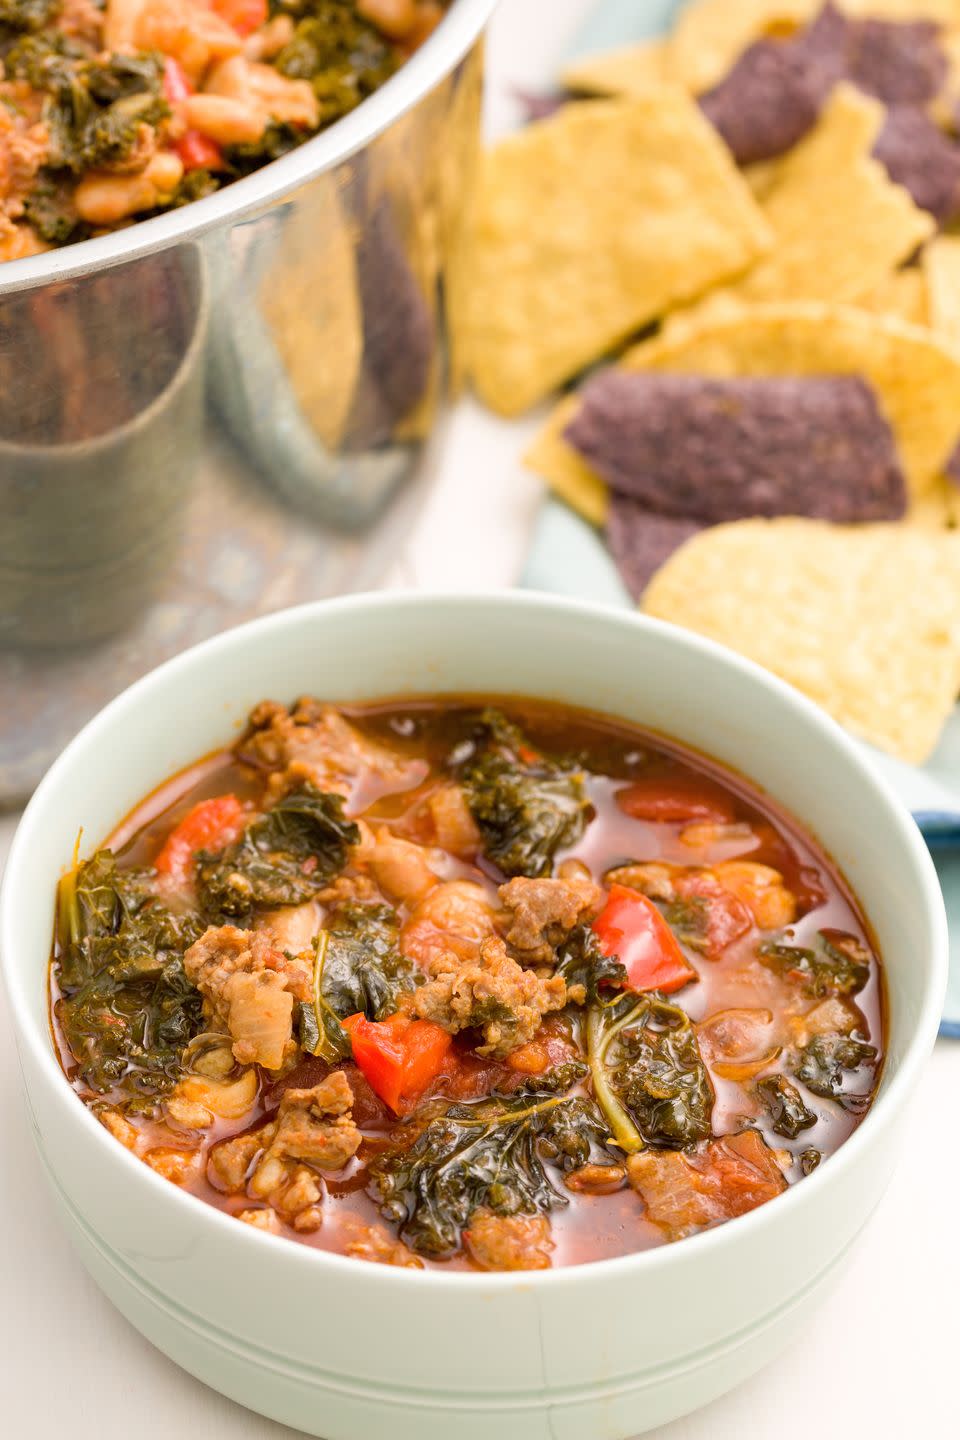 Spicy Turkey Sausage and Kale Chili